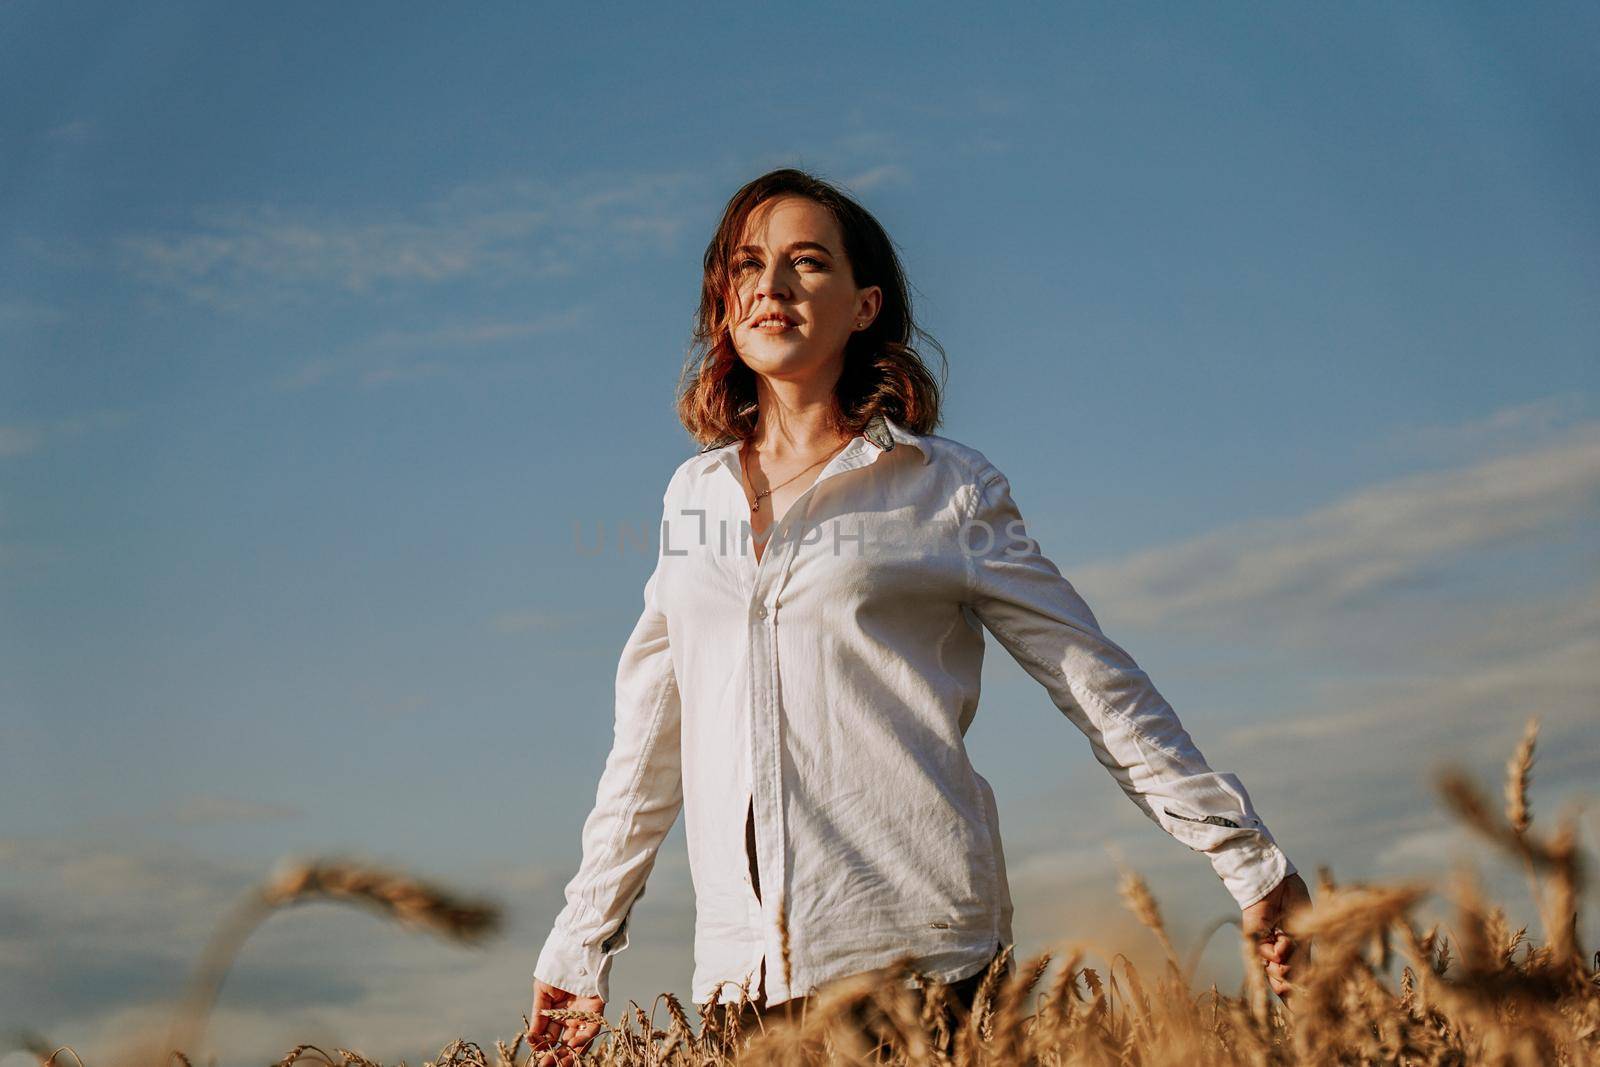 Happy young woman in a white shirt in a wheat field. Sunny day. by natali_brill